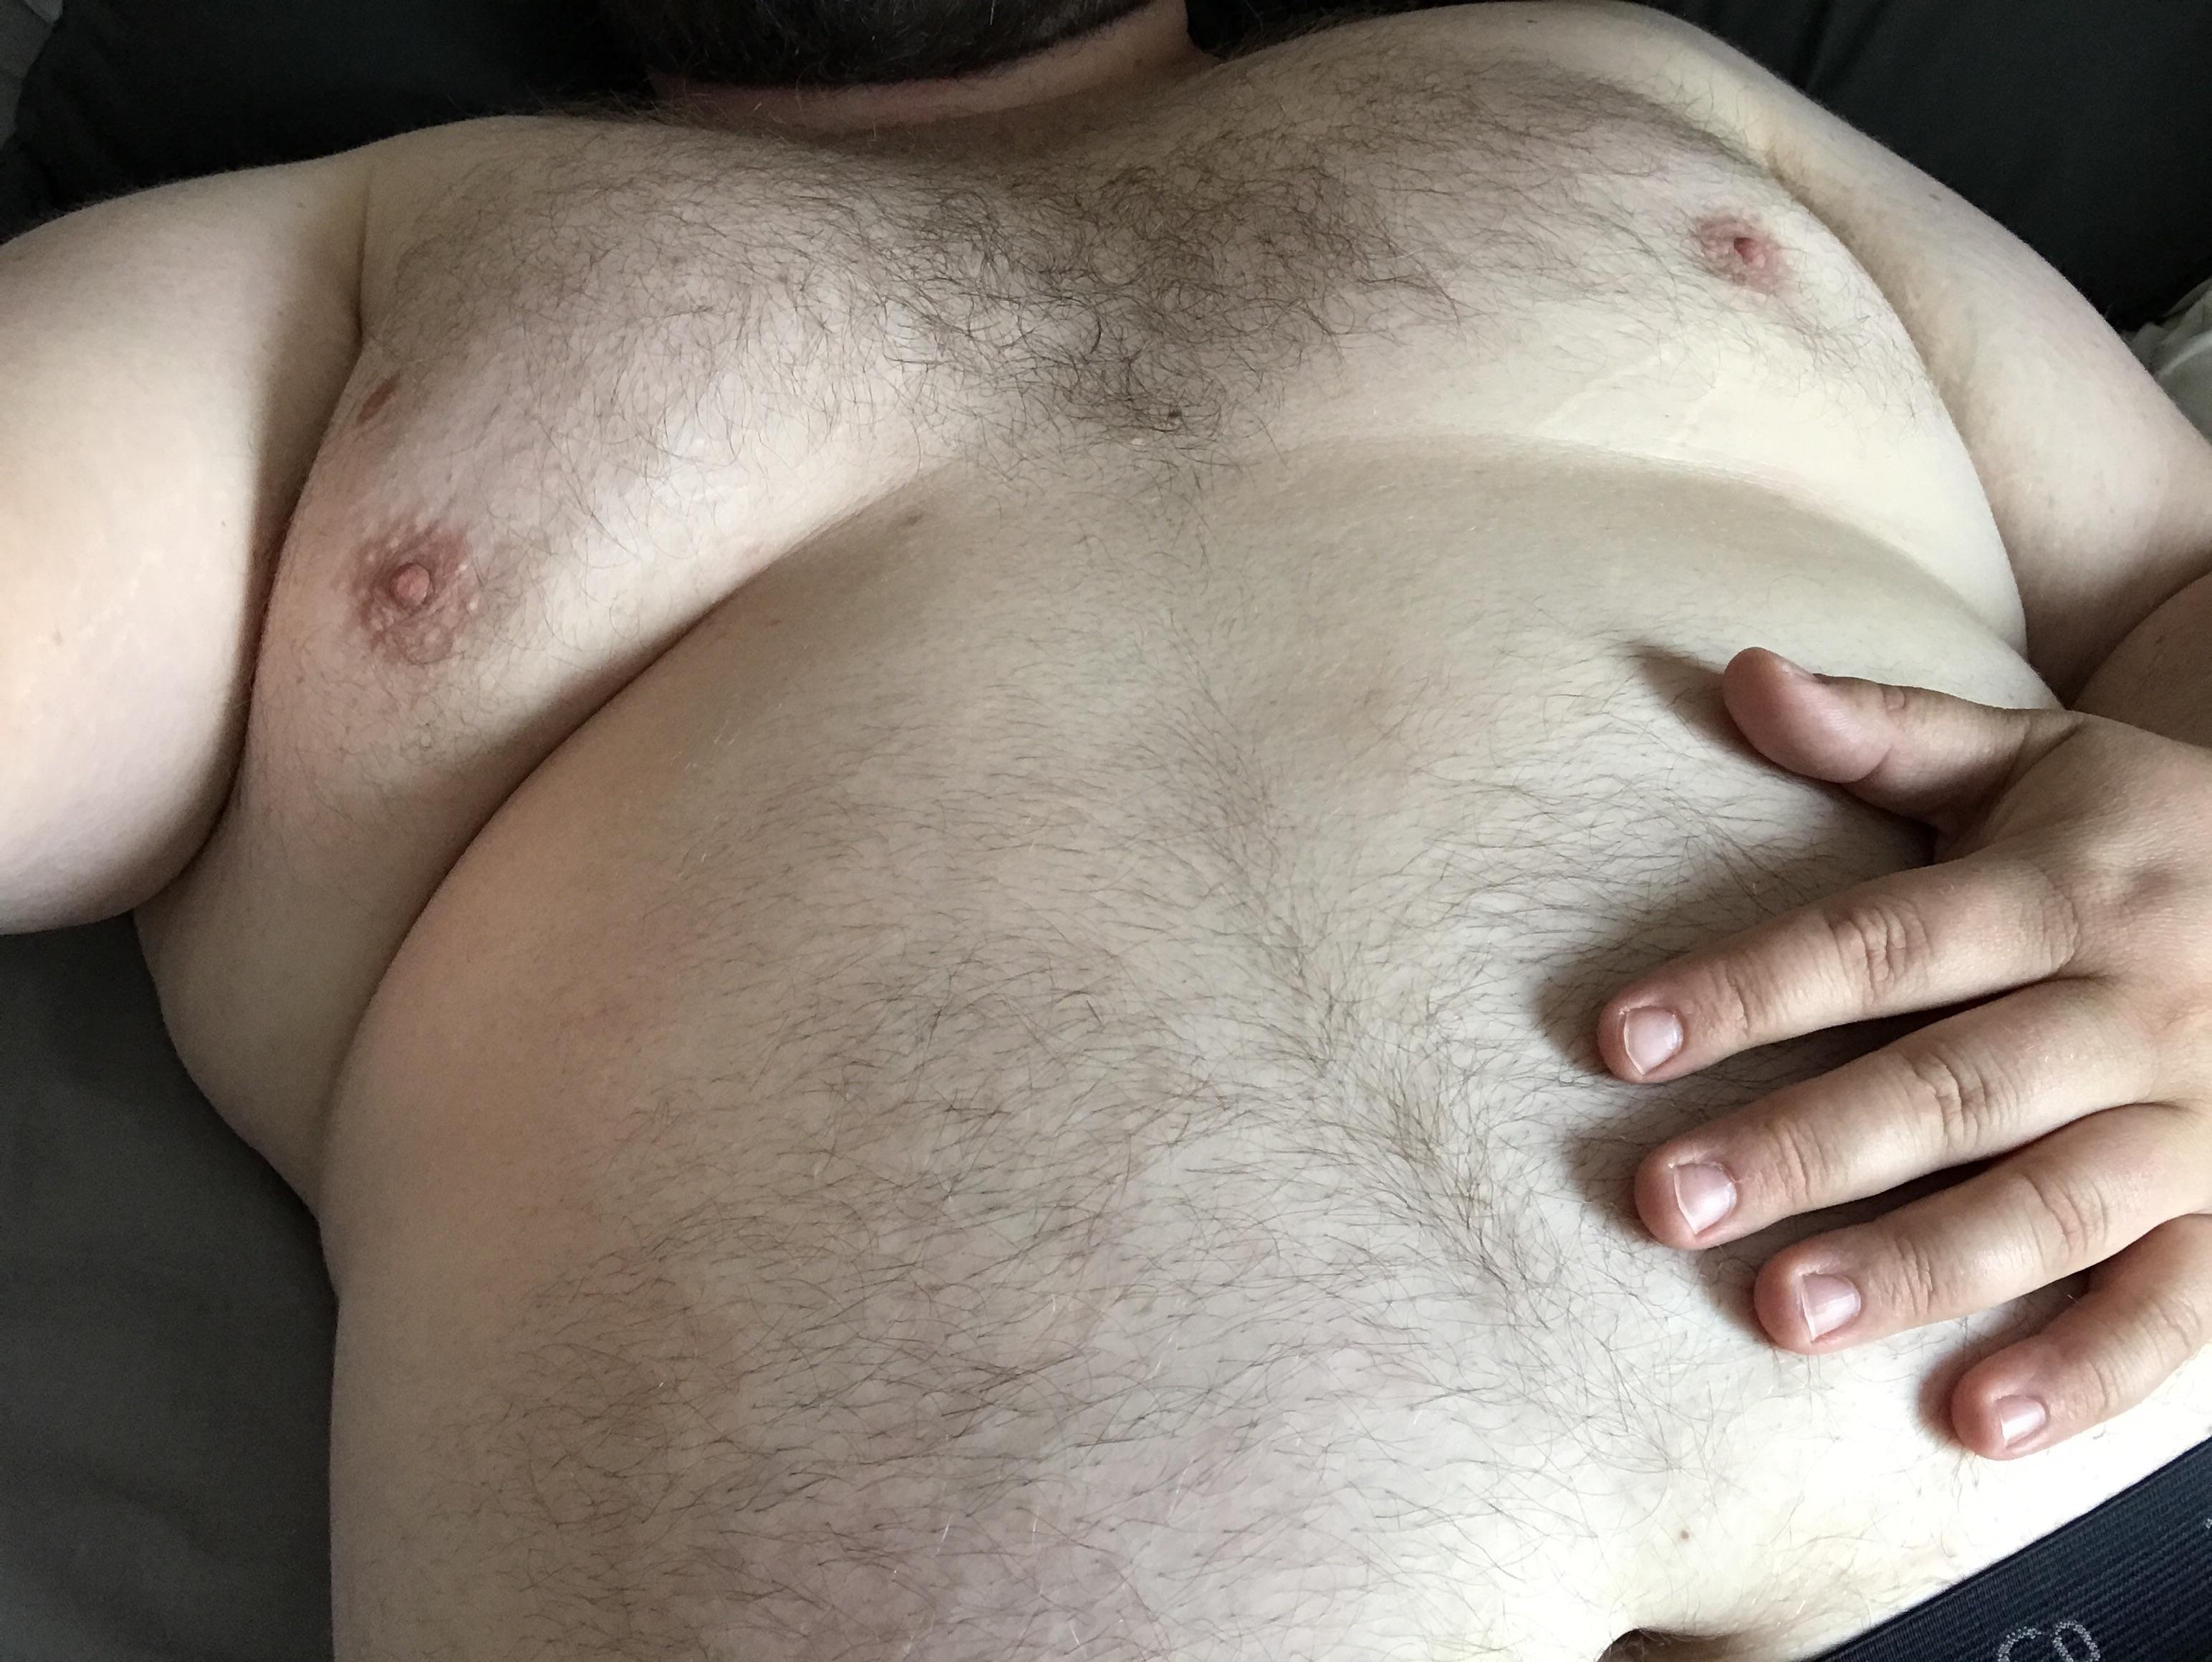 I want someone to play with my man boobs and big belly.